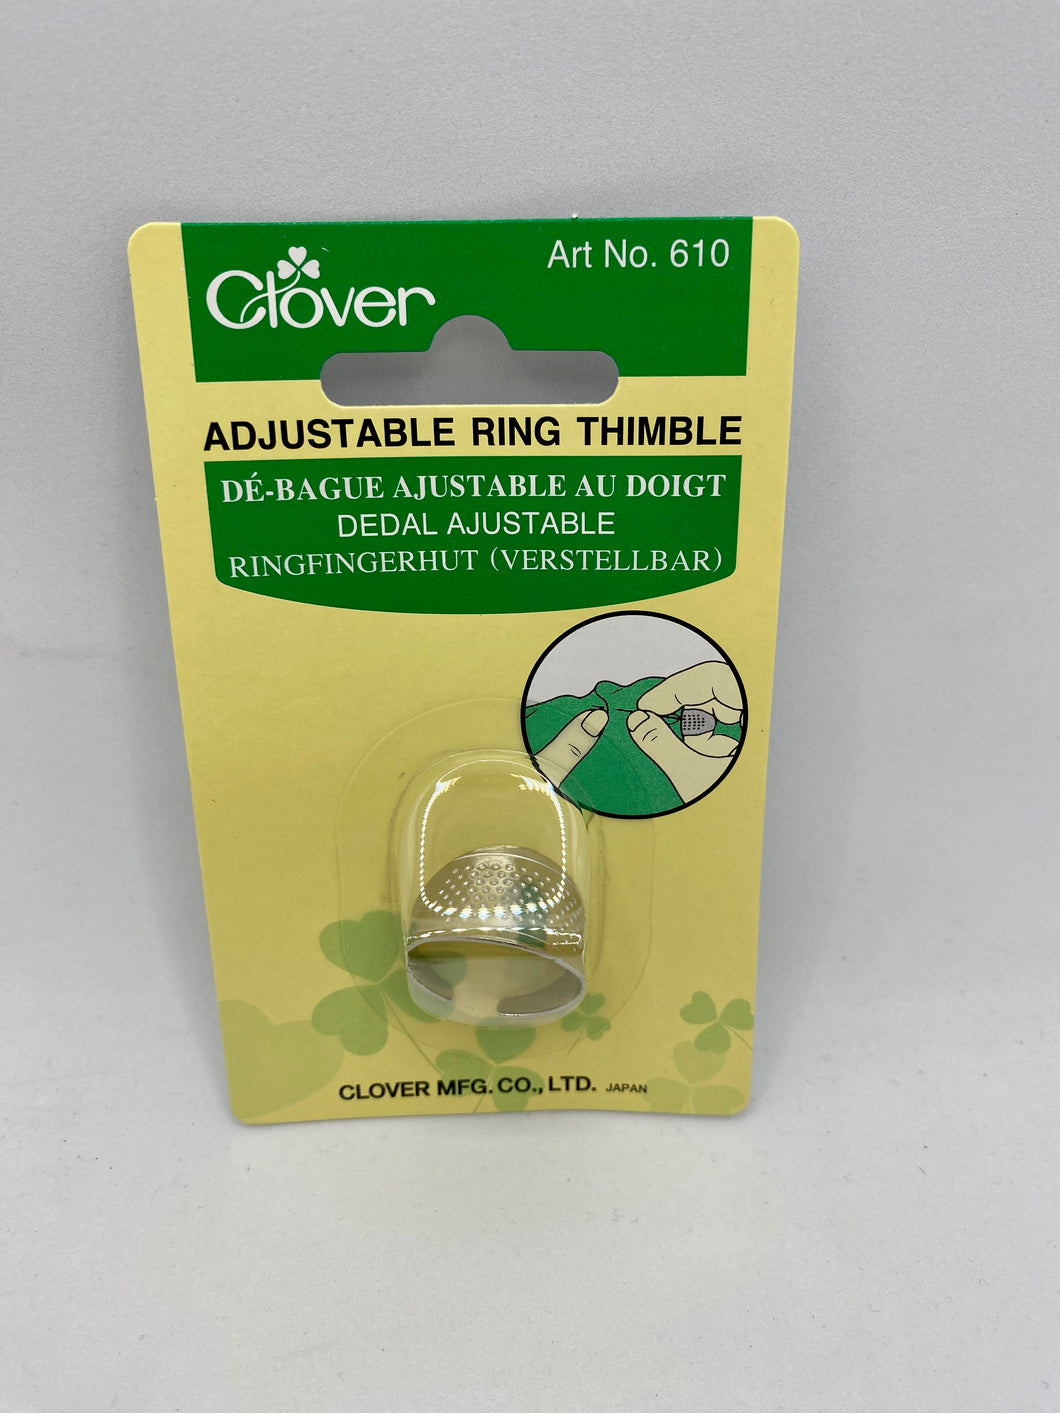 Adjustable Ring Thimble by Clover